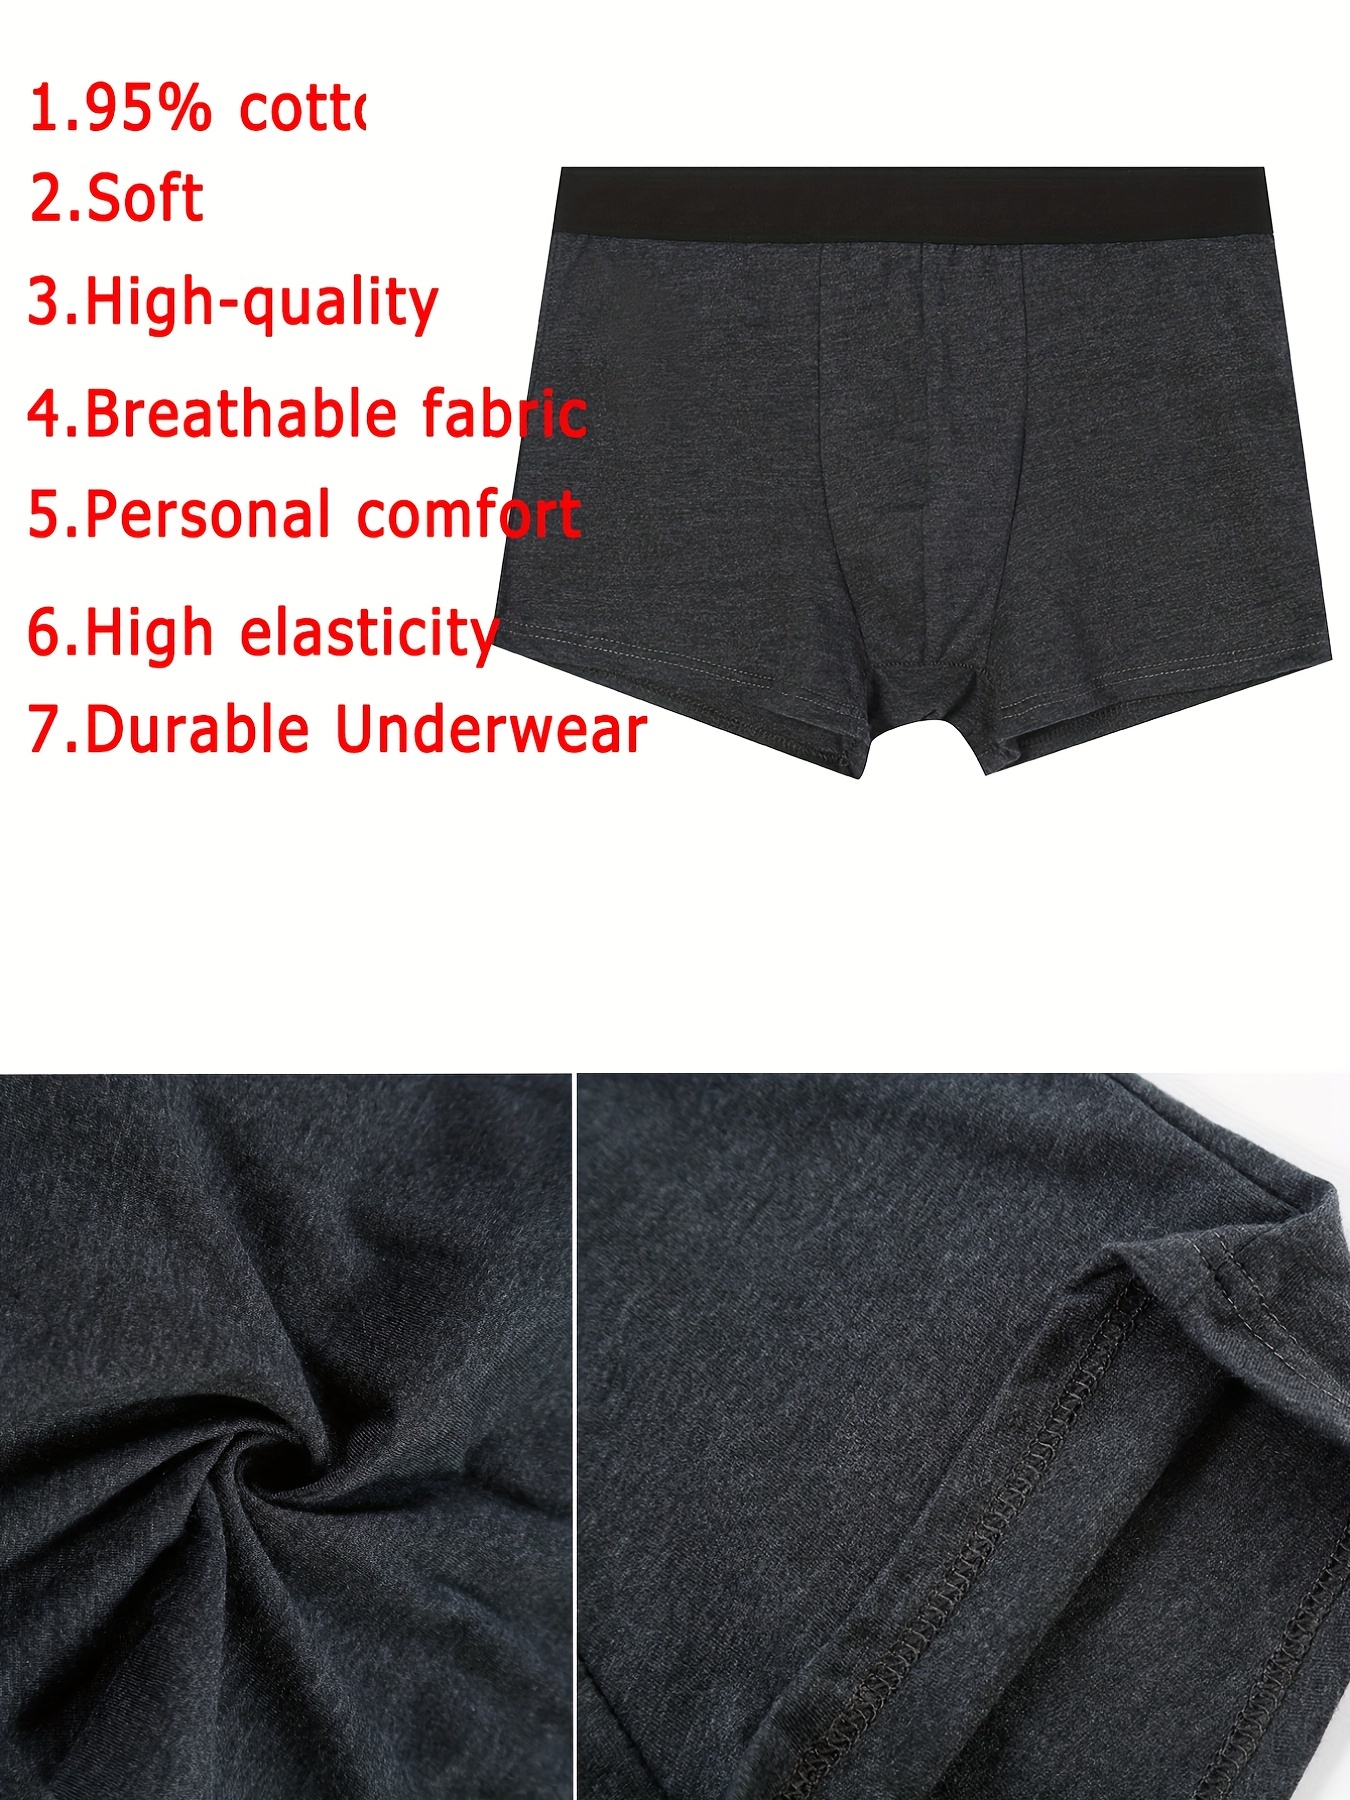 Boxer shorts for men: high-quality & comfortable